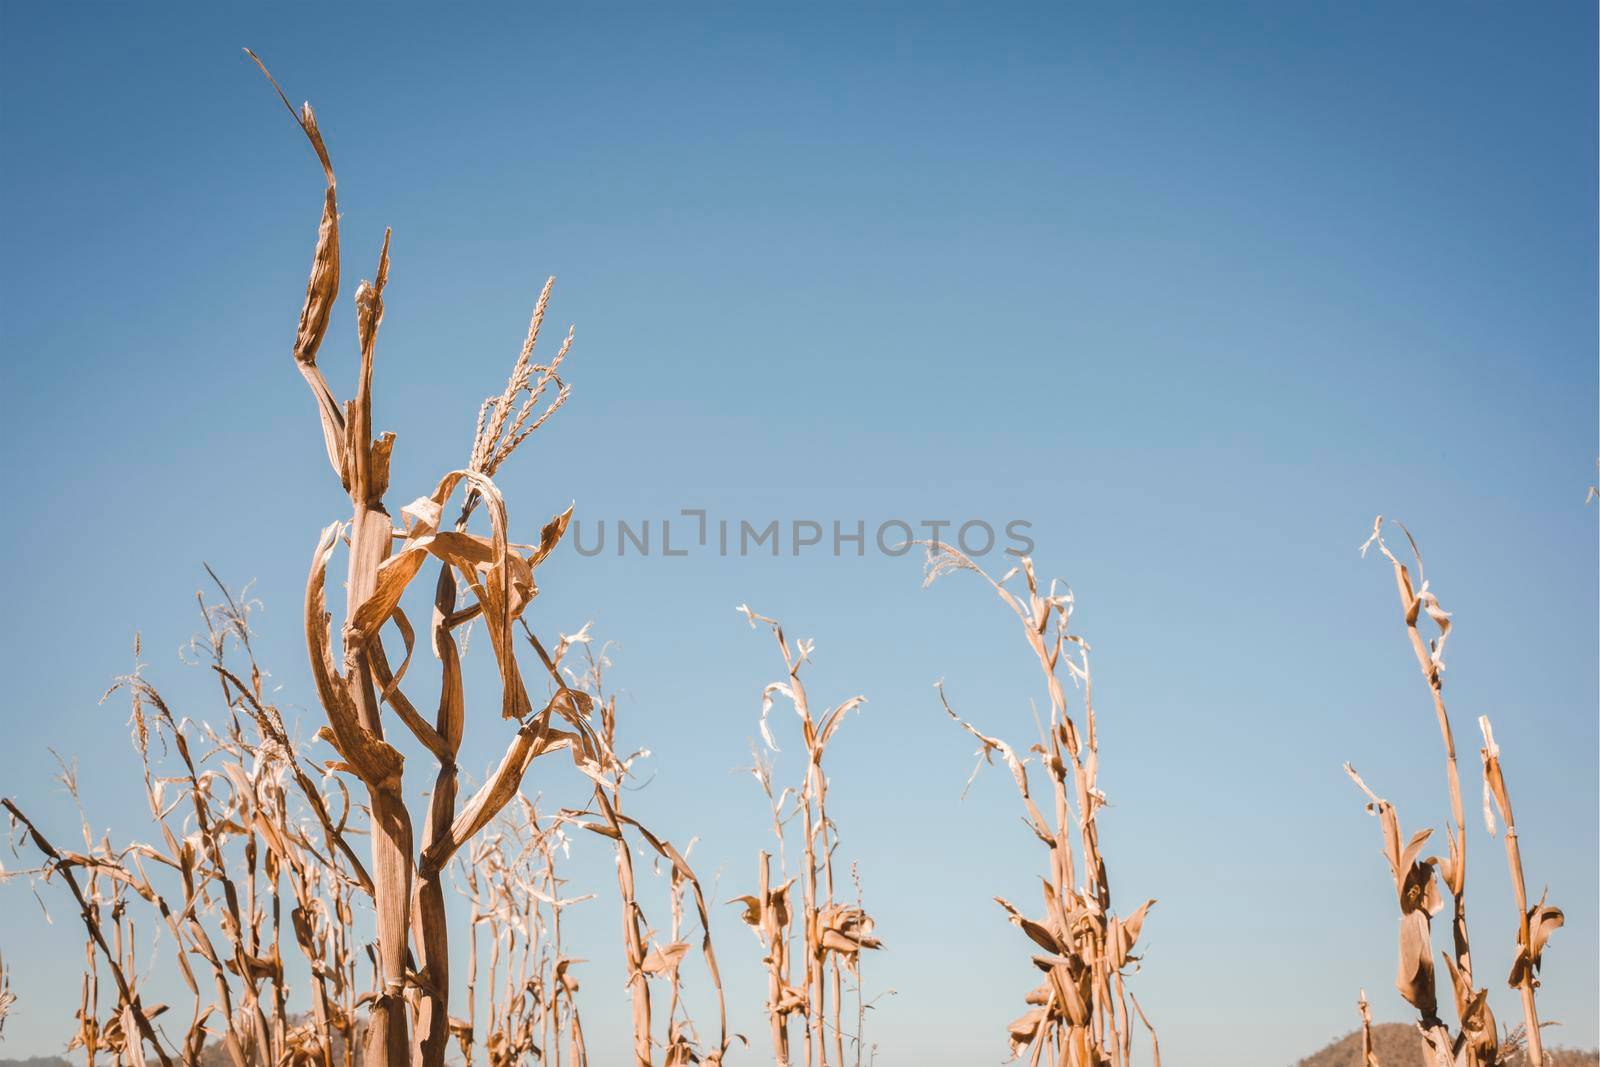 Drought has decimated a crop of corn and left the plants dried out and dead. Symbol of global warming and climate change.